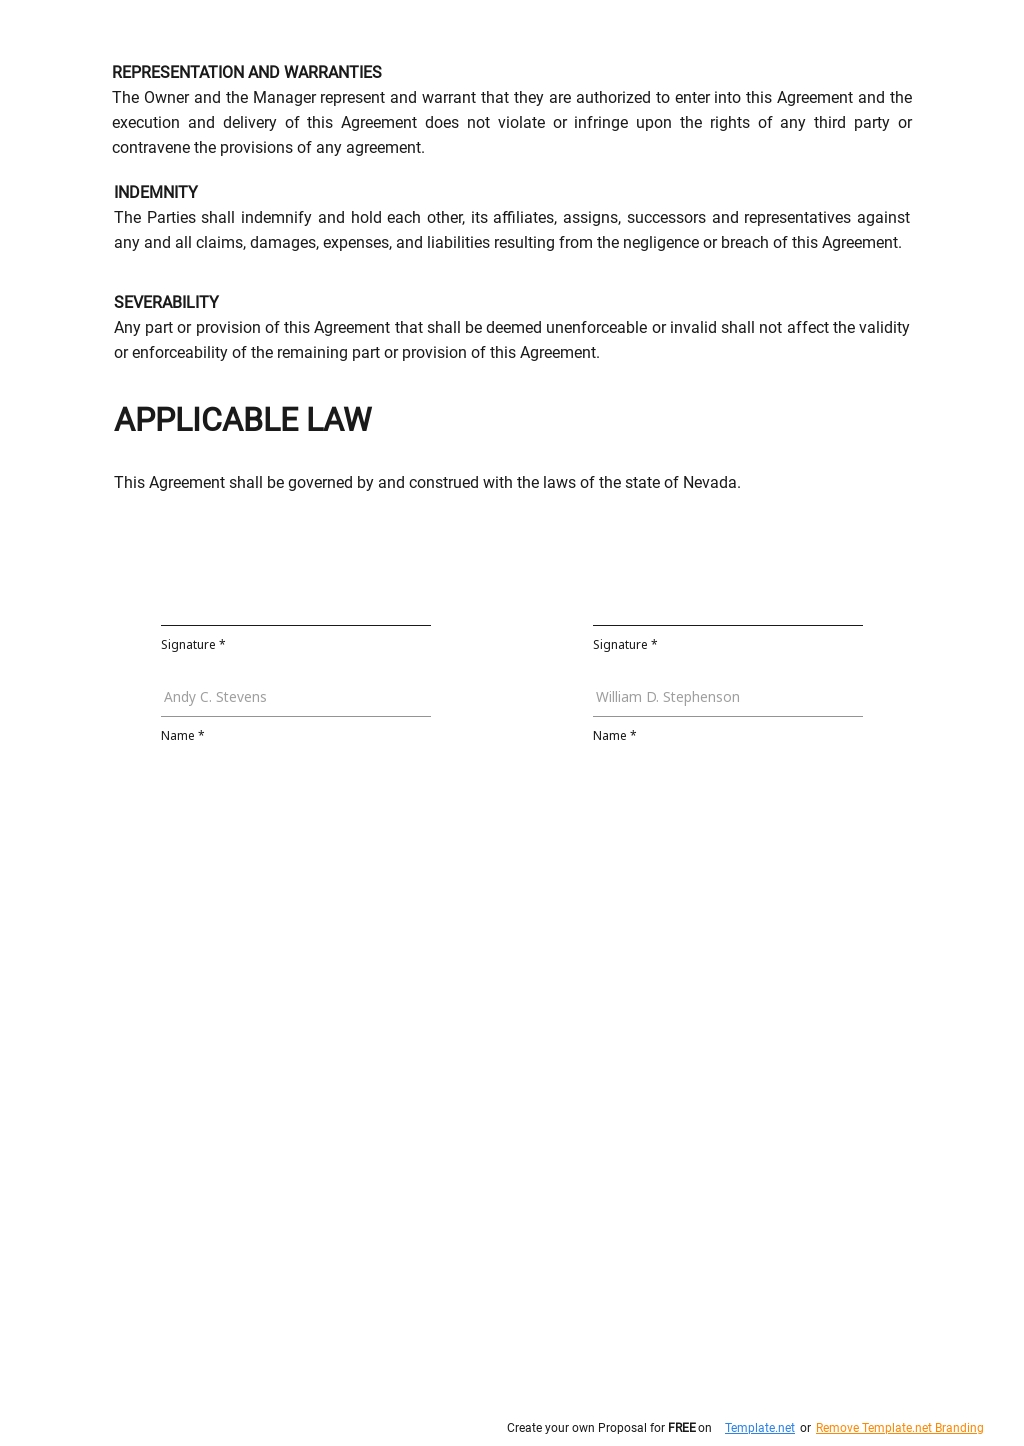 Simple Property Management Agreement Template 2.jpe